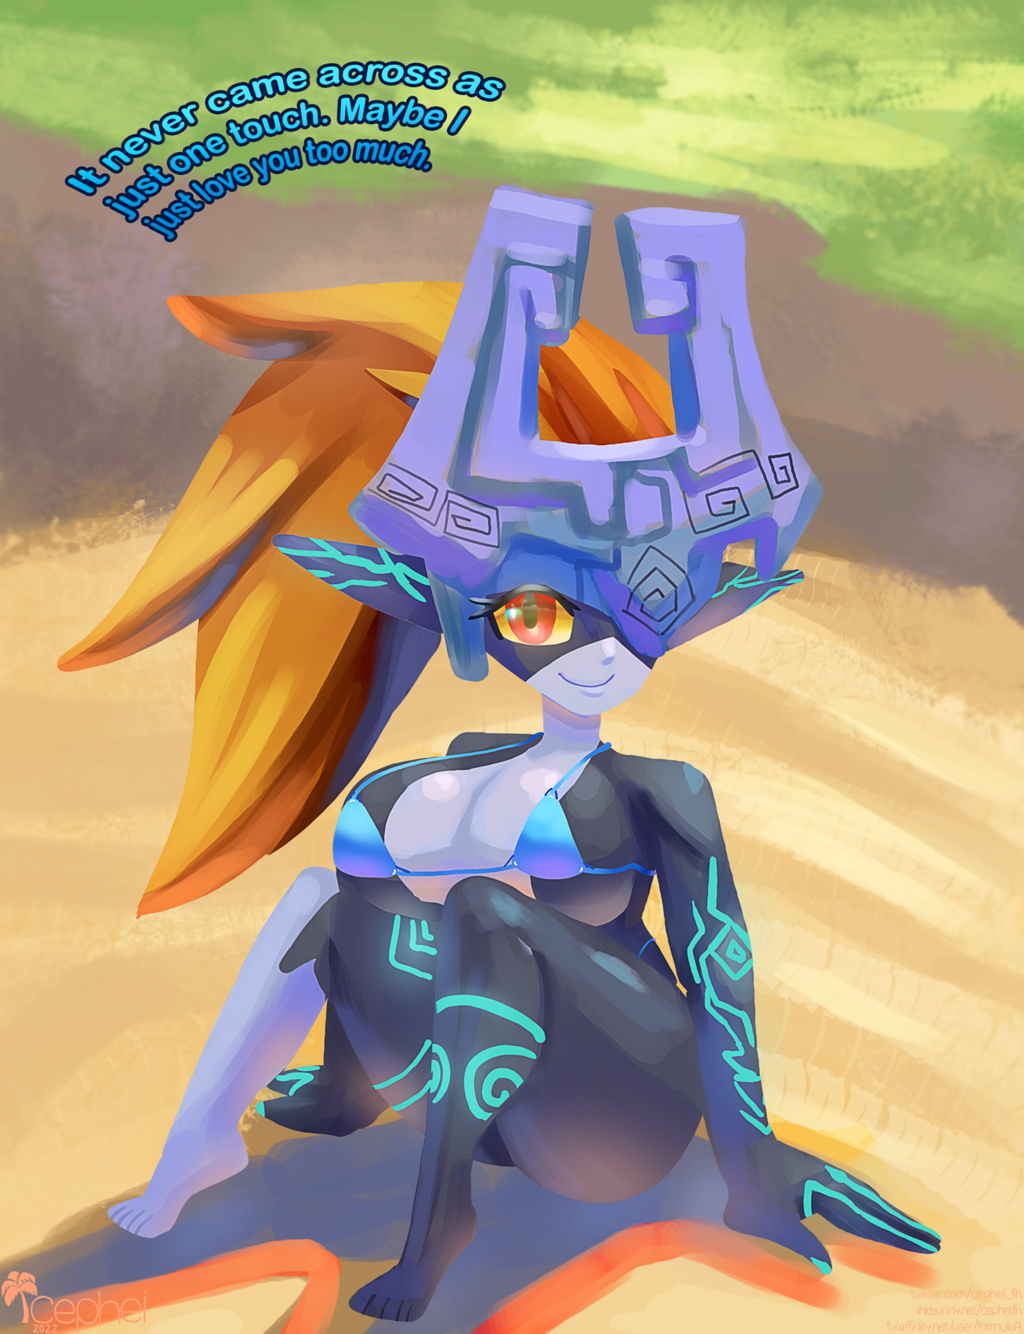 Most recent image: Midna on the Beach Shore